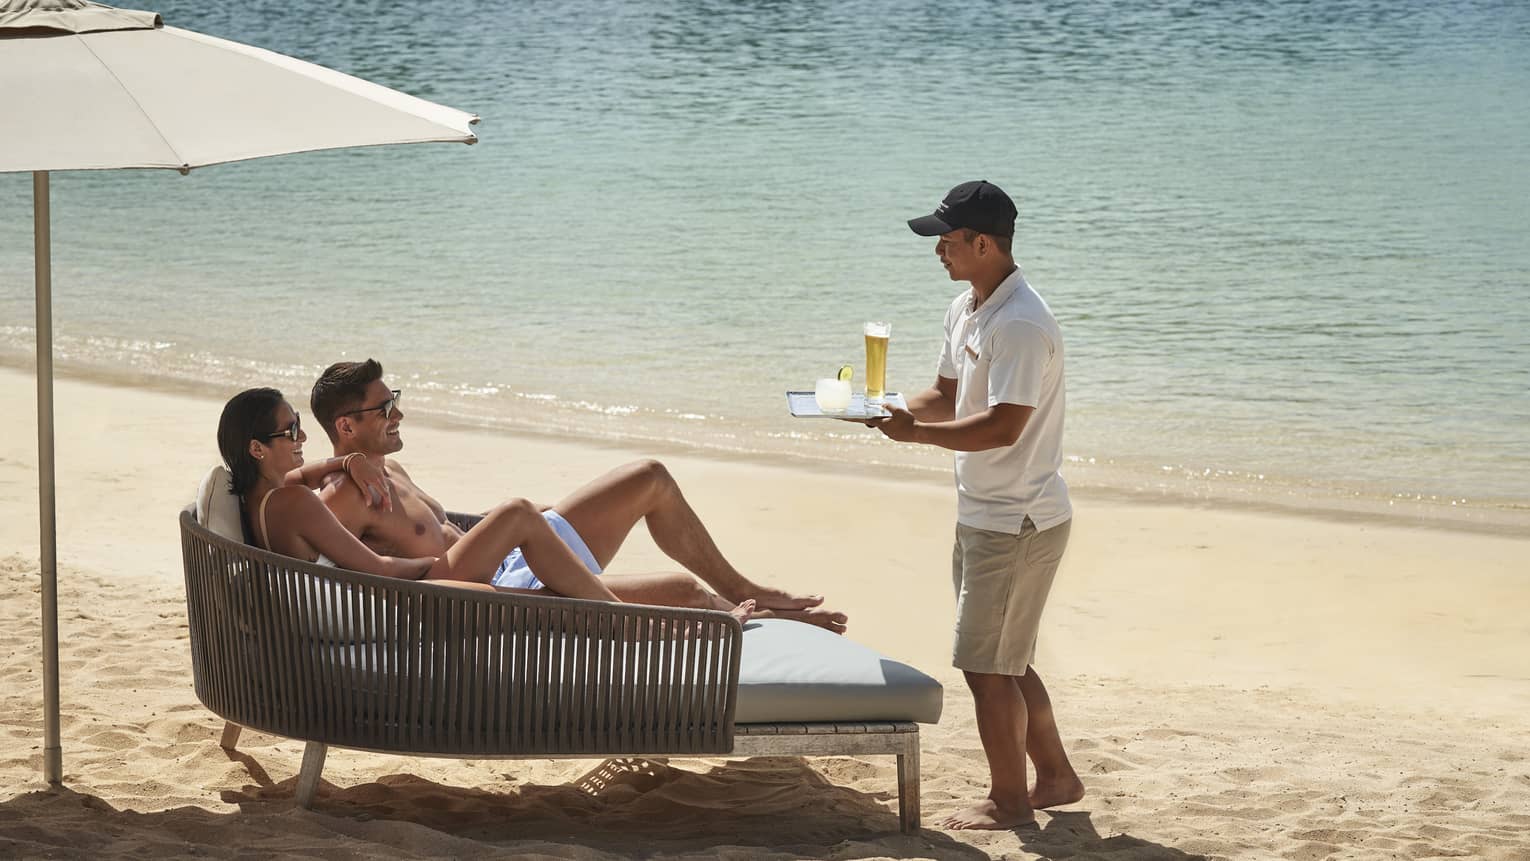 A couple lounges on a daybed on the beach while a beach attendant brings them cocktails on a tray